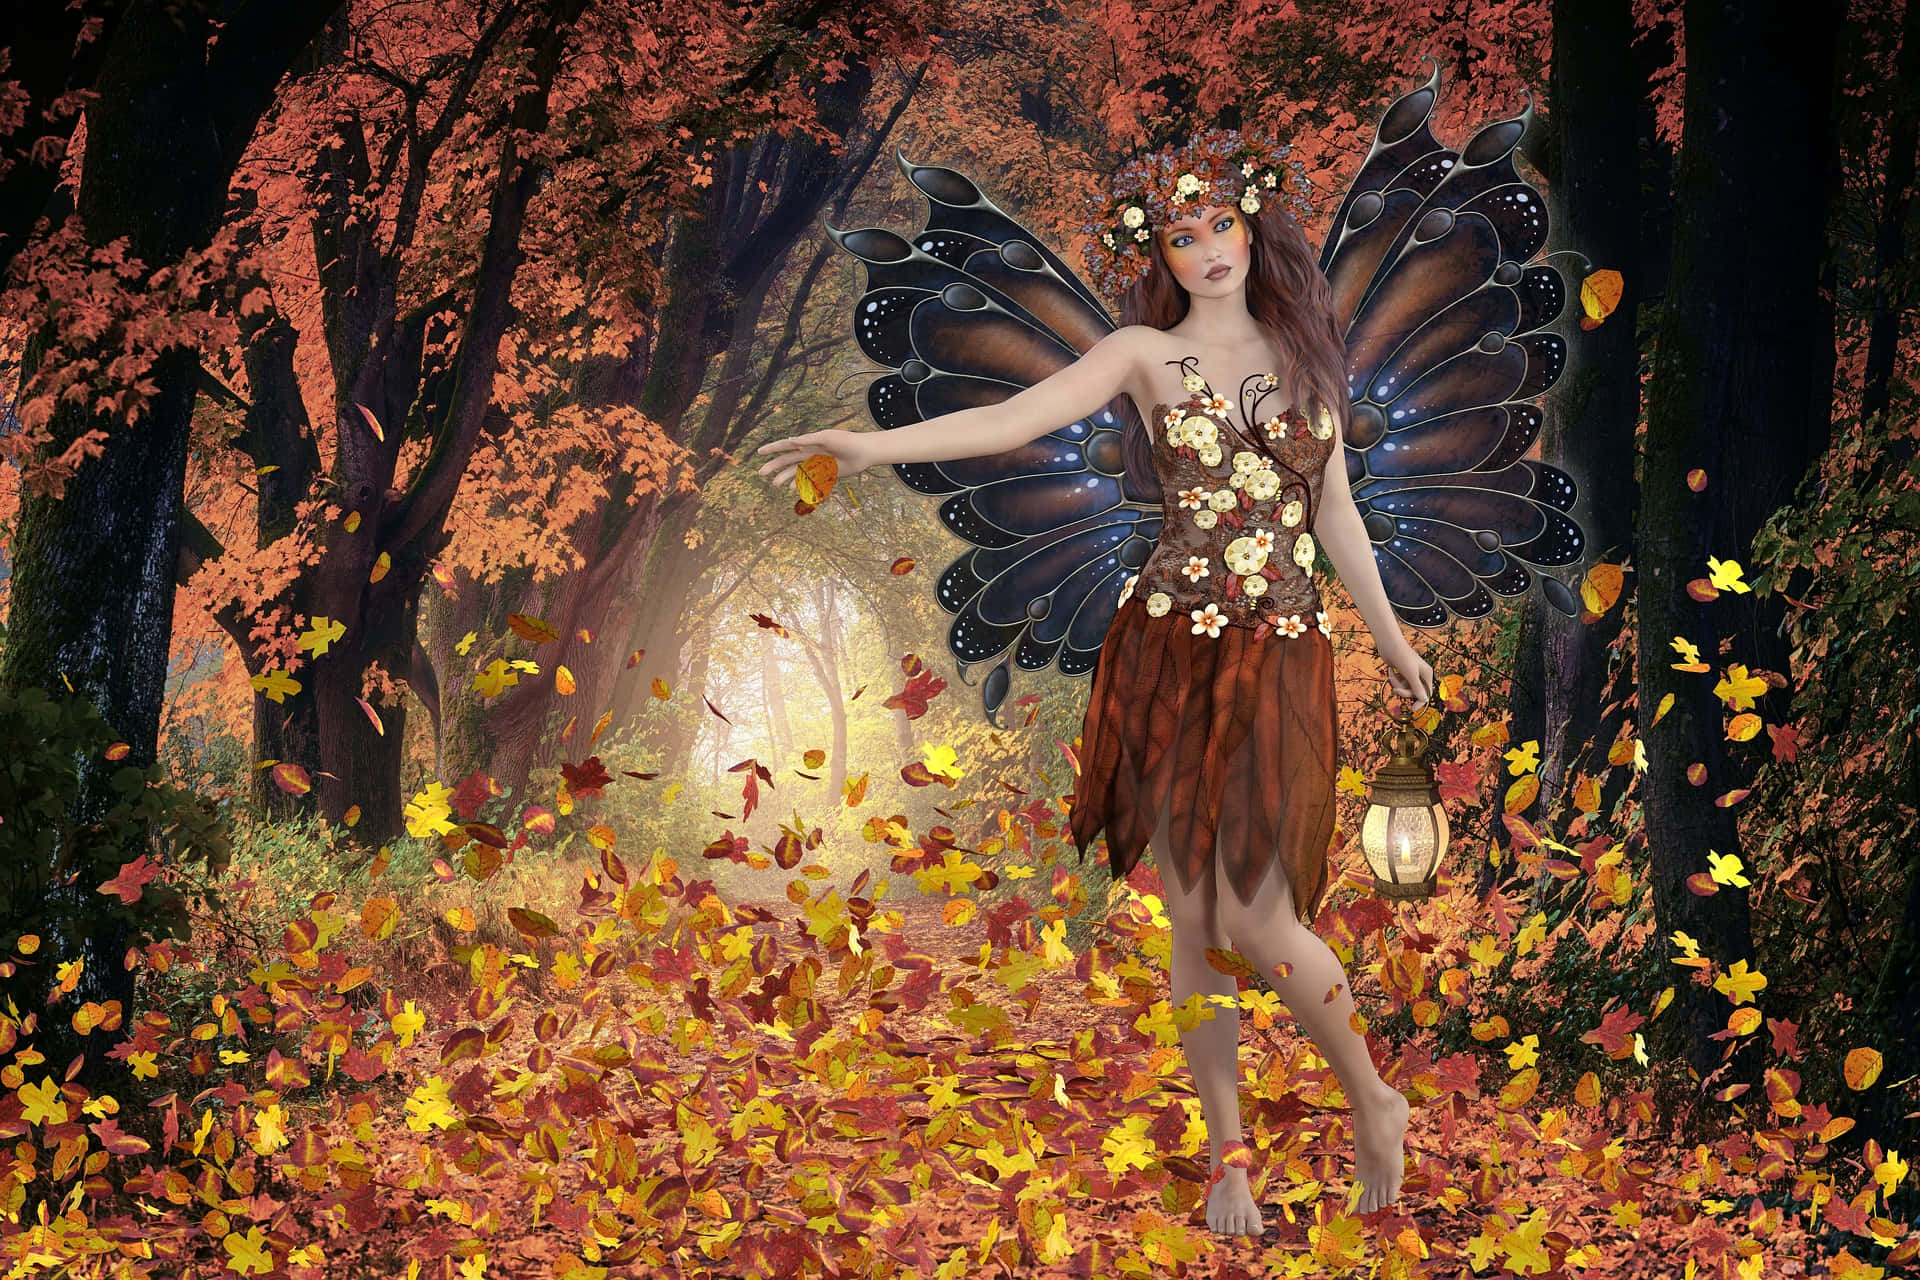 real fairies images